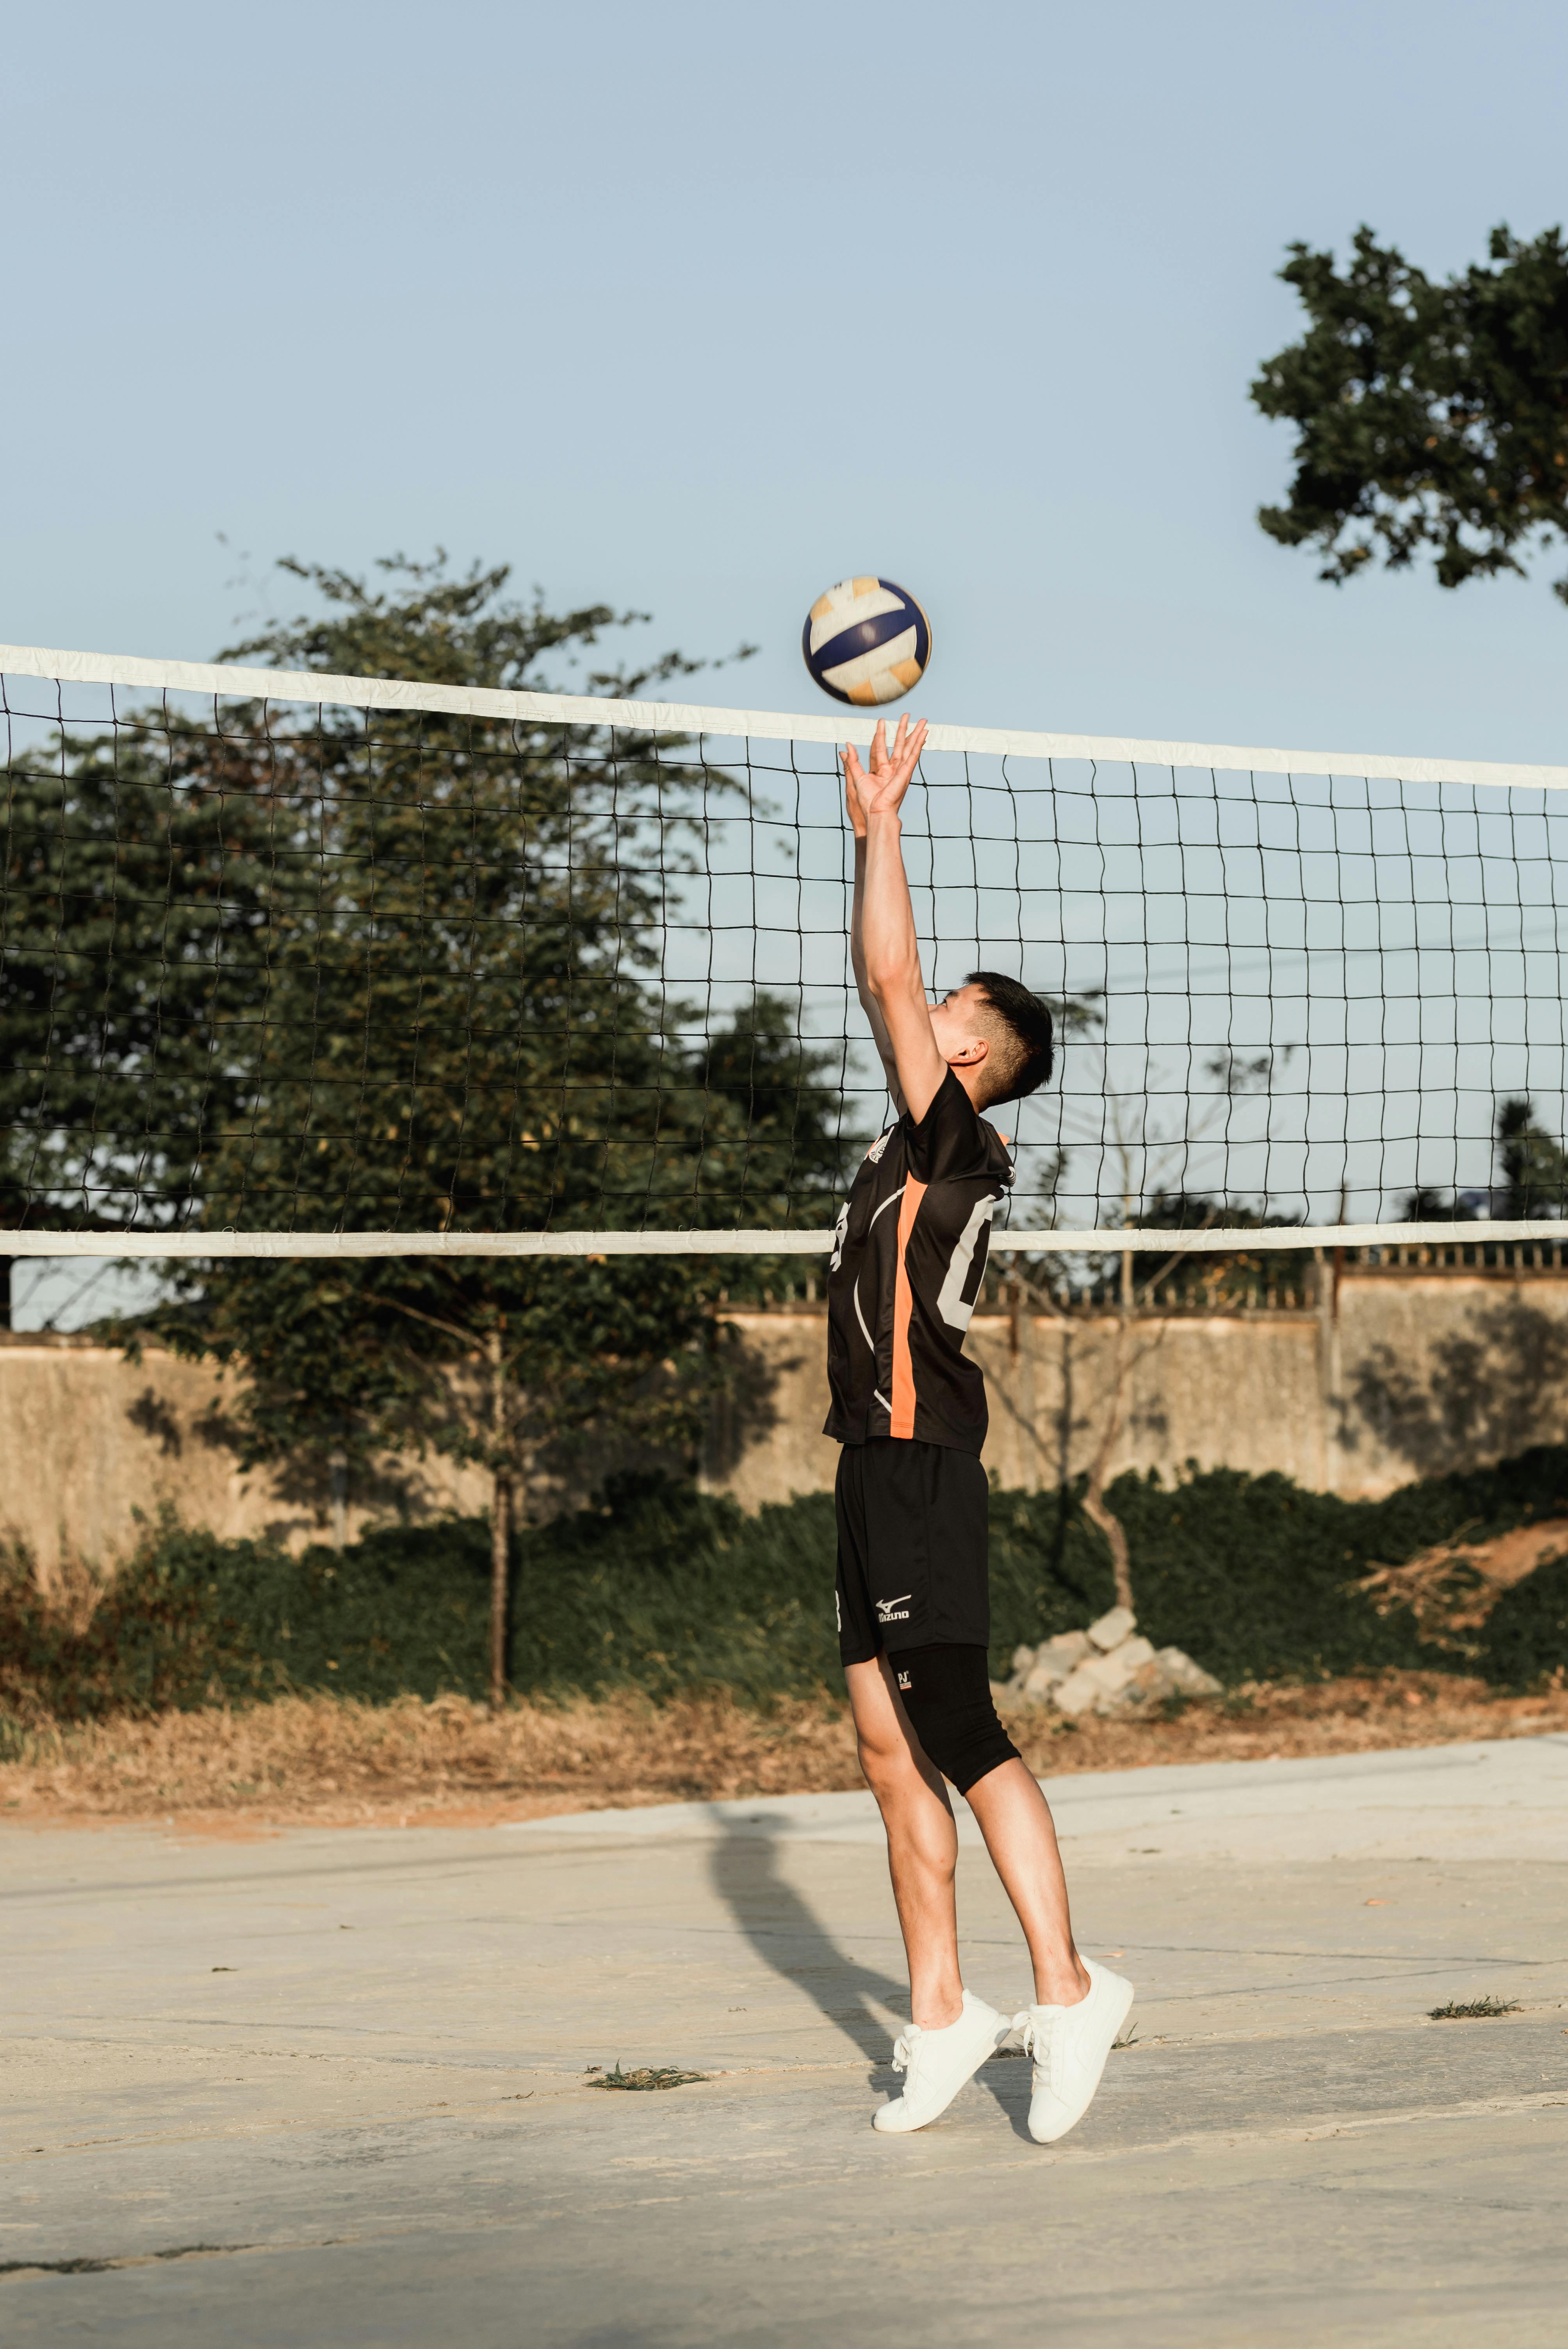 photo of man playing volleyball